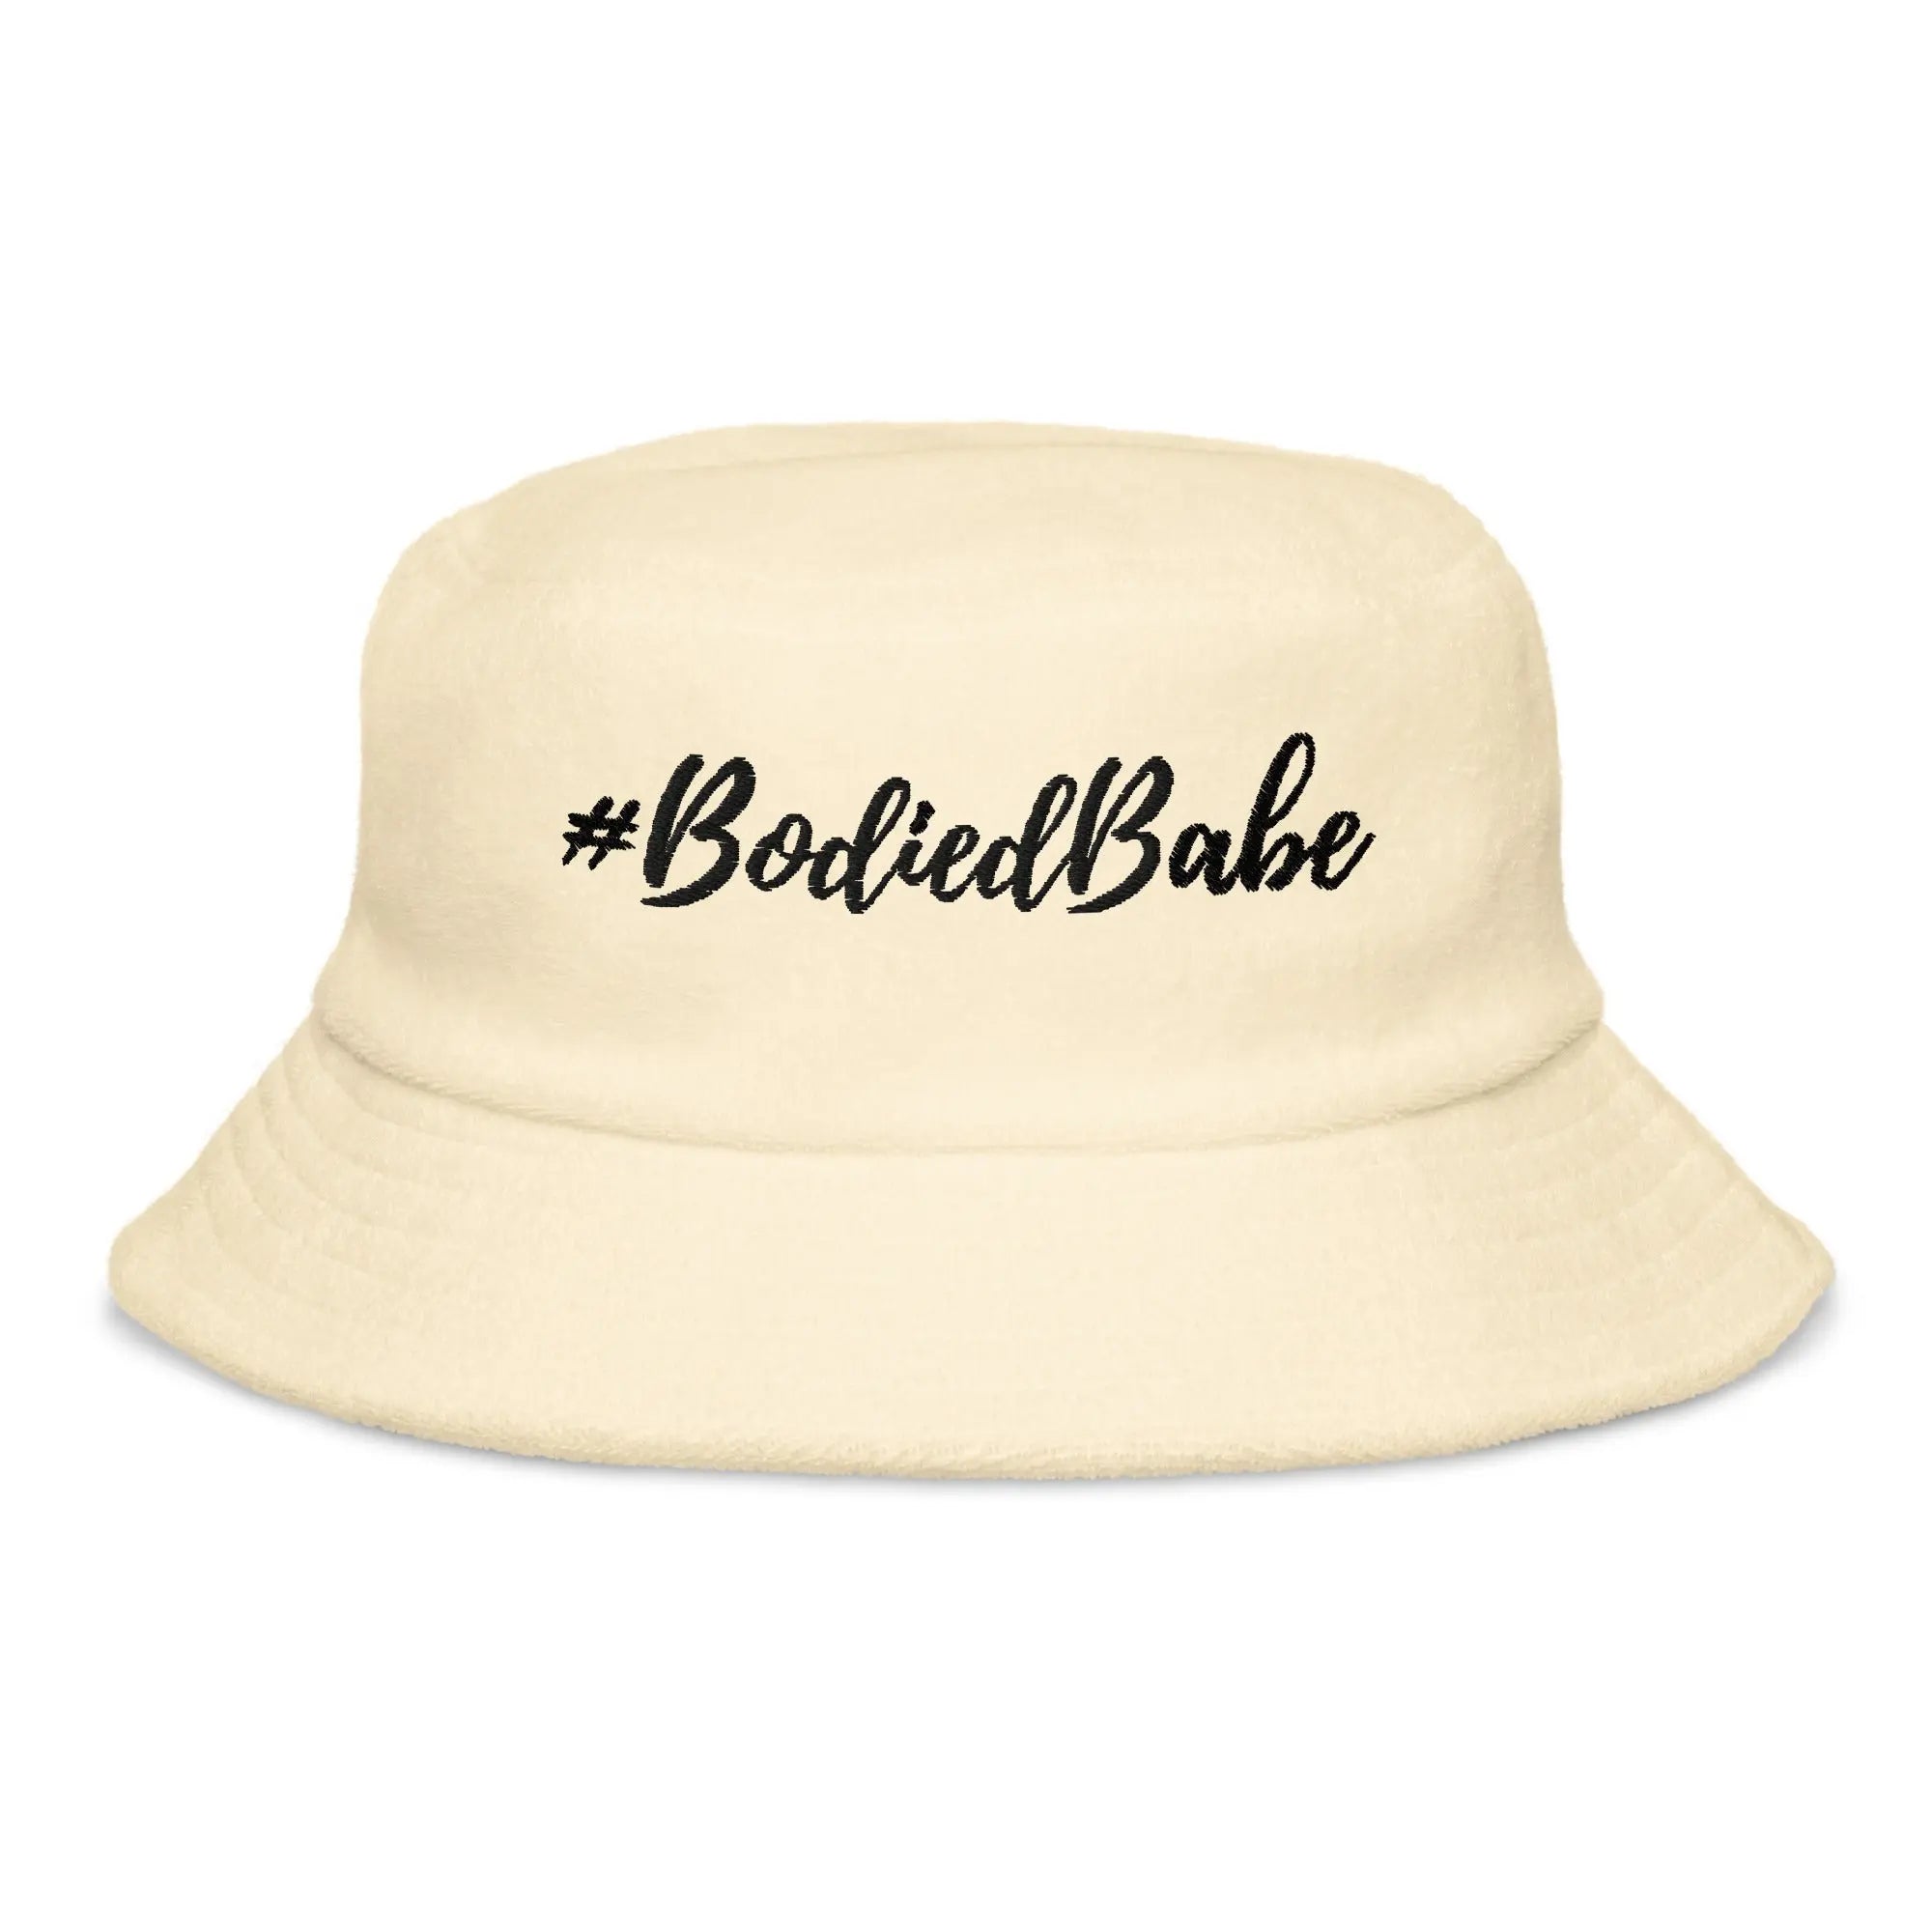 Terry cloth bucket hat - THE BODY FIX